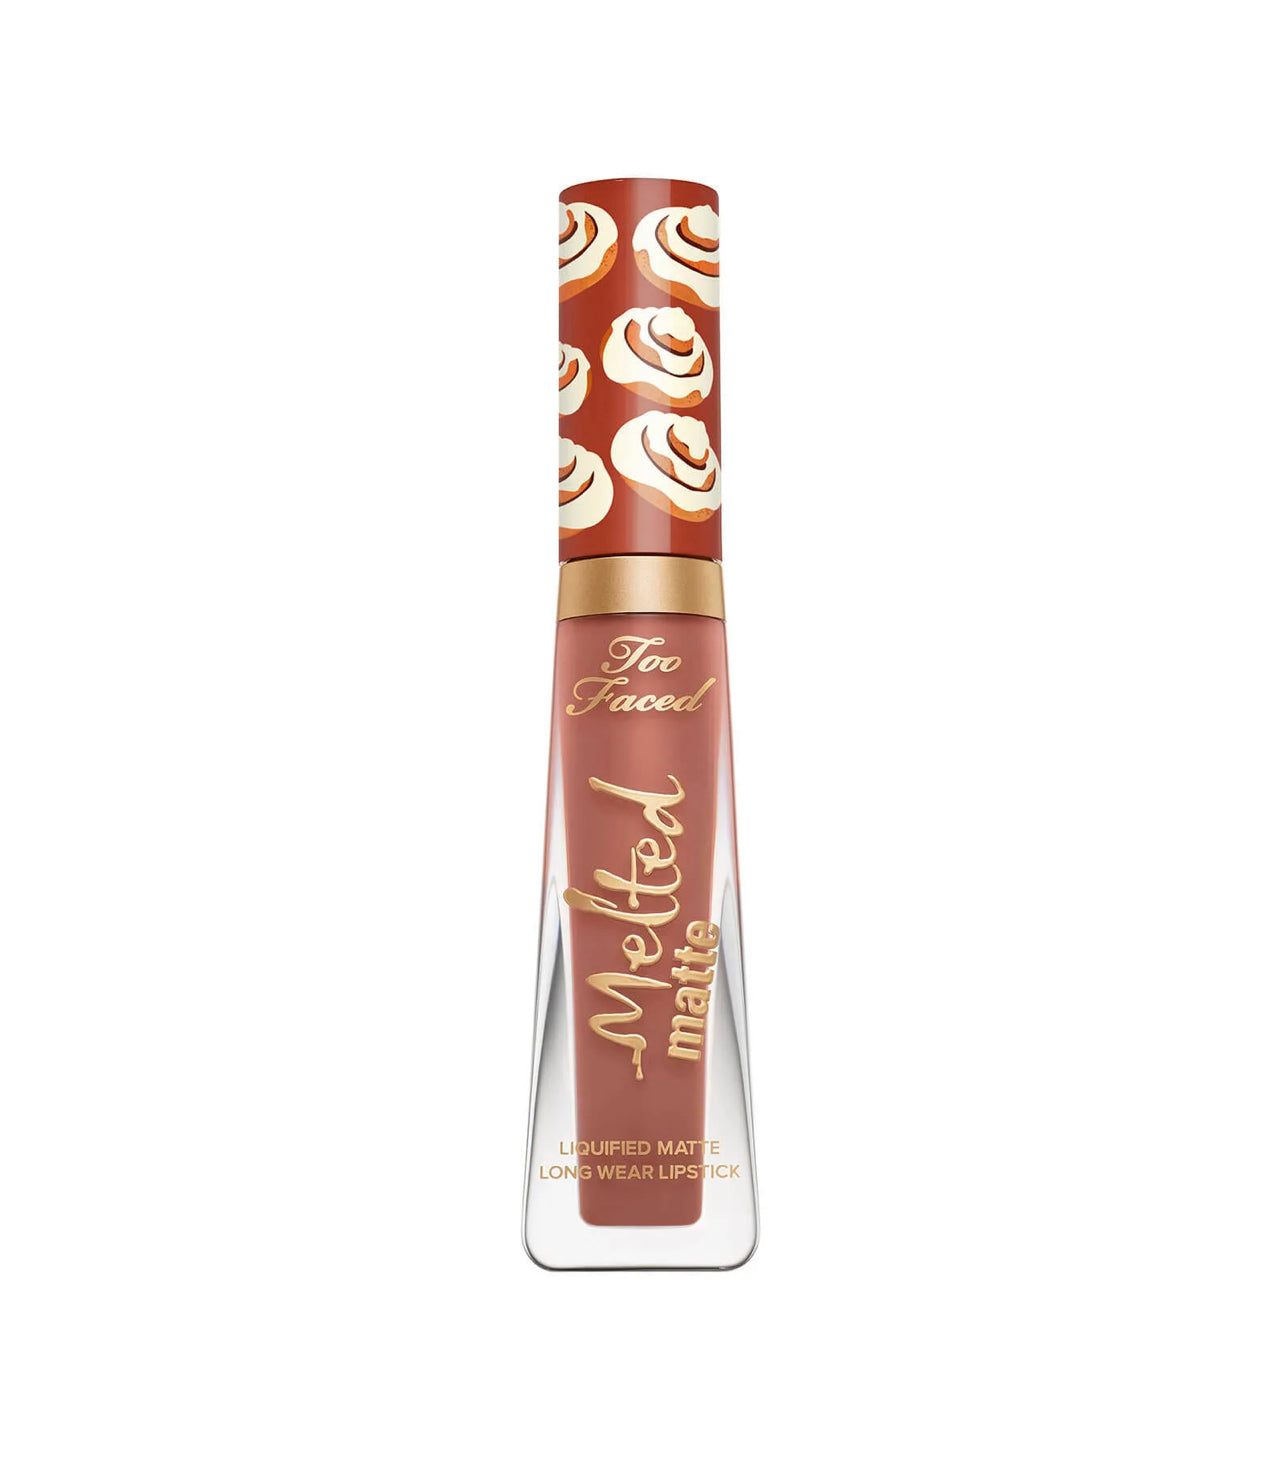 Too Faced Melted Matte Liquified Long Wear Lipstick - Strawberry Hill